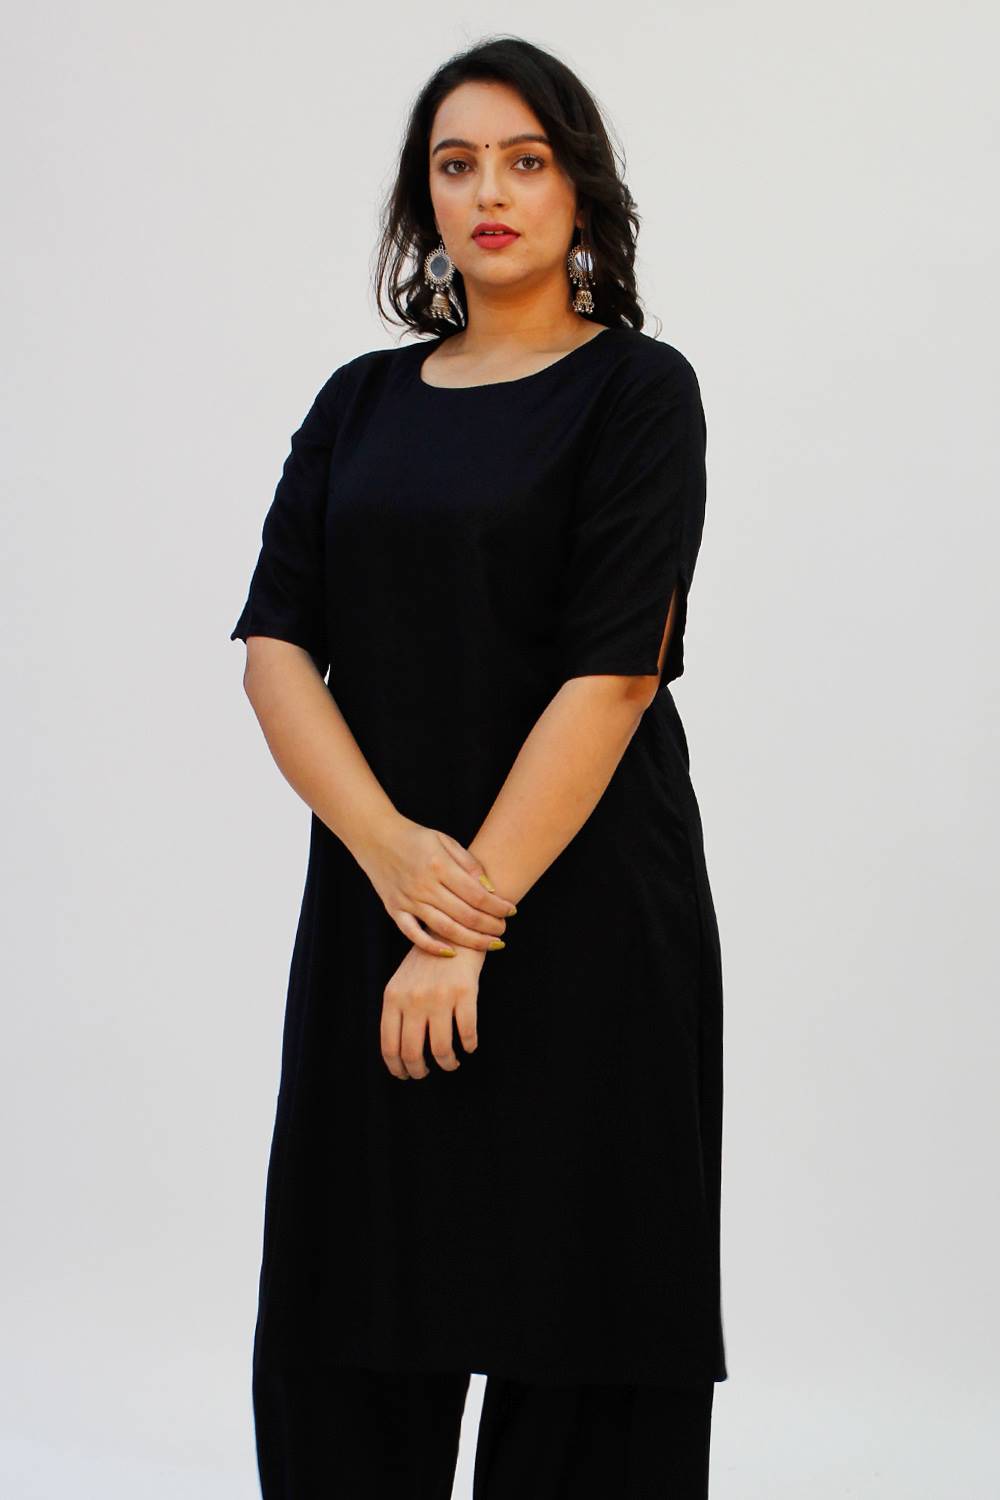 LASTINCH All Size's Solid Black Kurti with three fourth sleeves